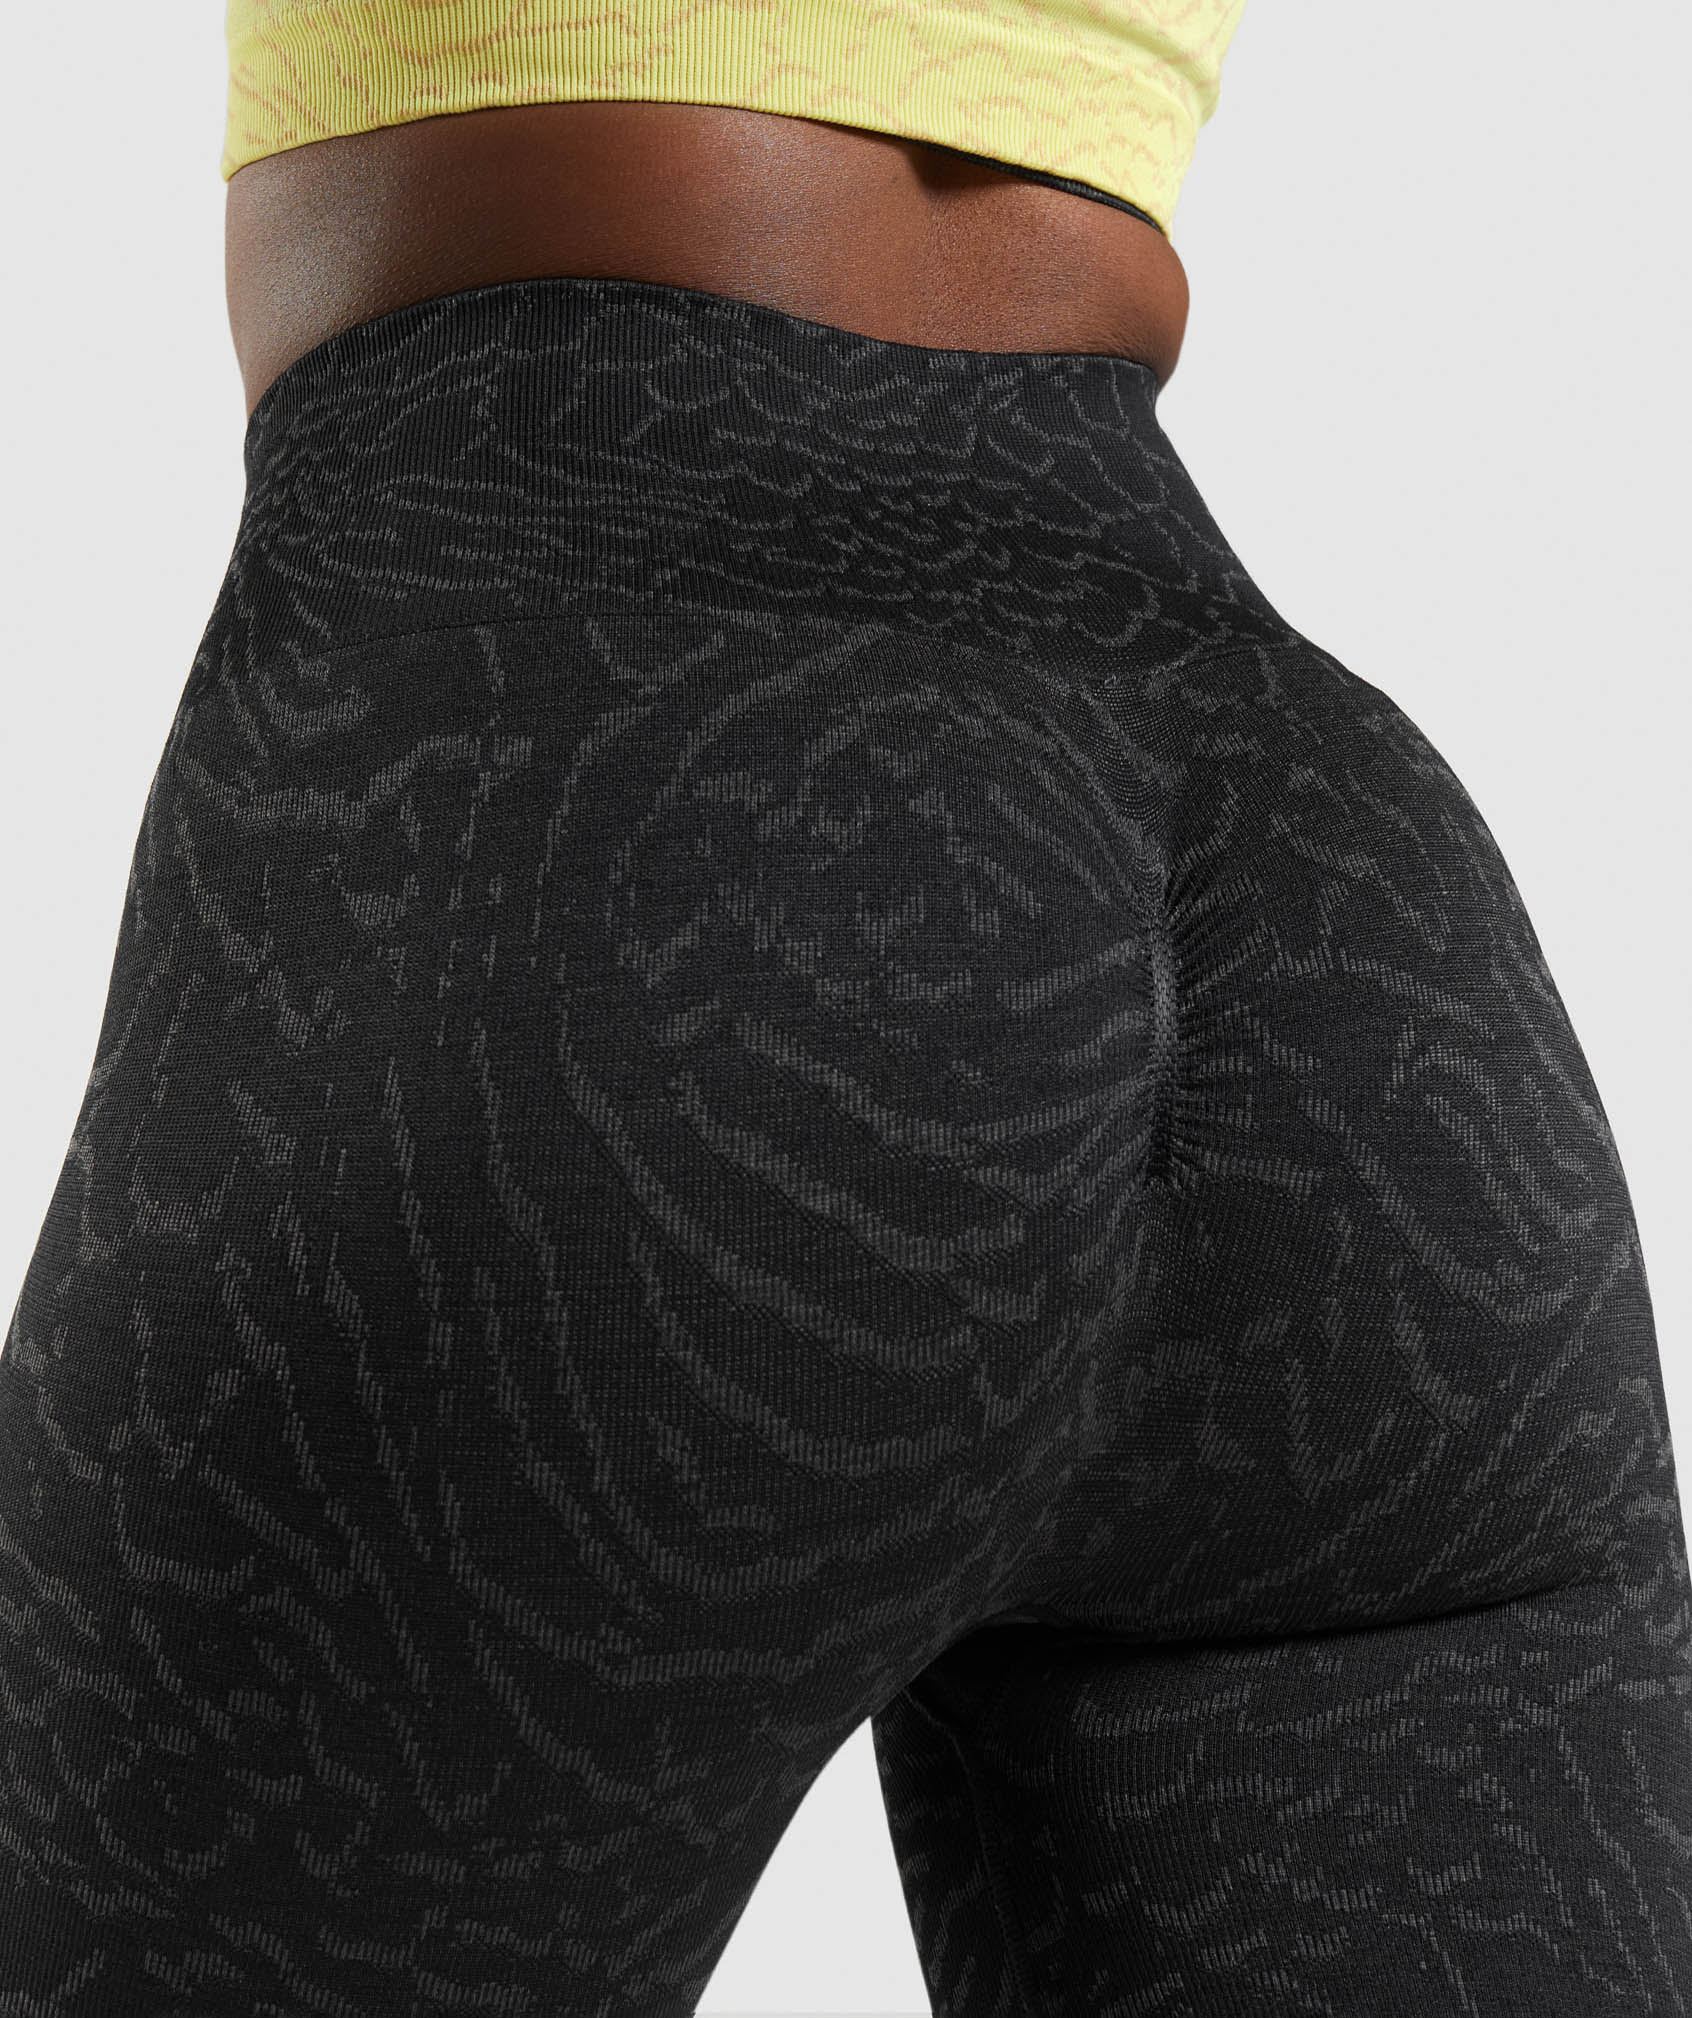 Adapt Animal Seamless Cycling Shorts in Black - view 6